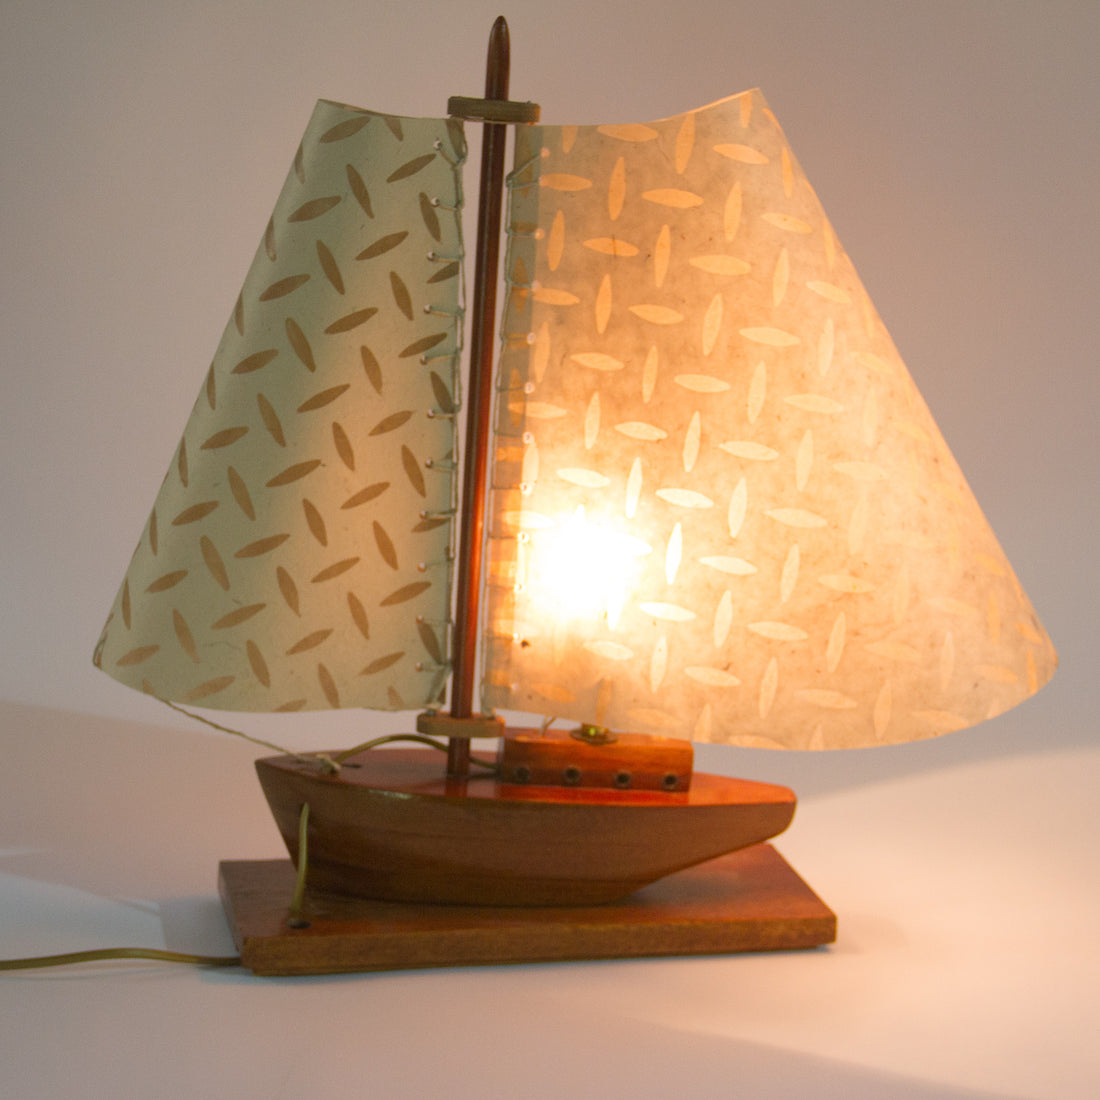 Bespoke Re-Covered Lamp Shades